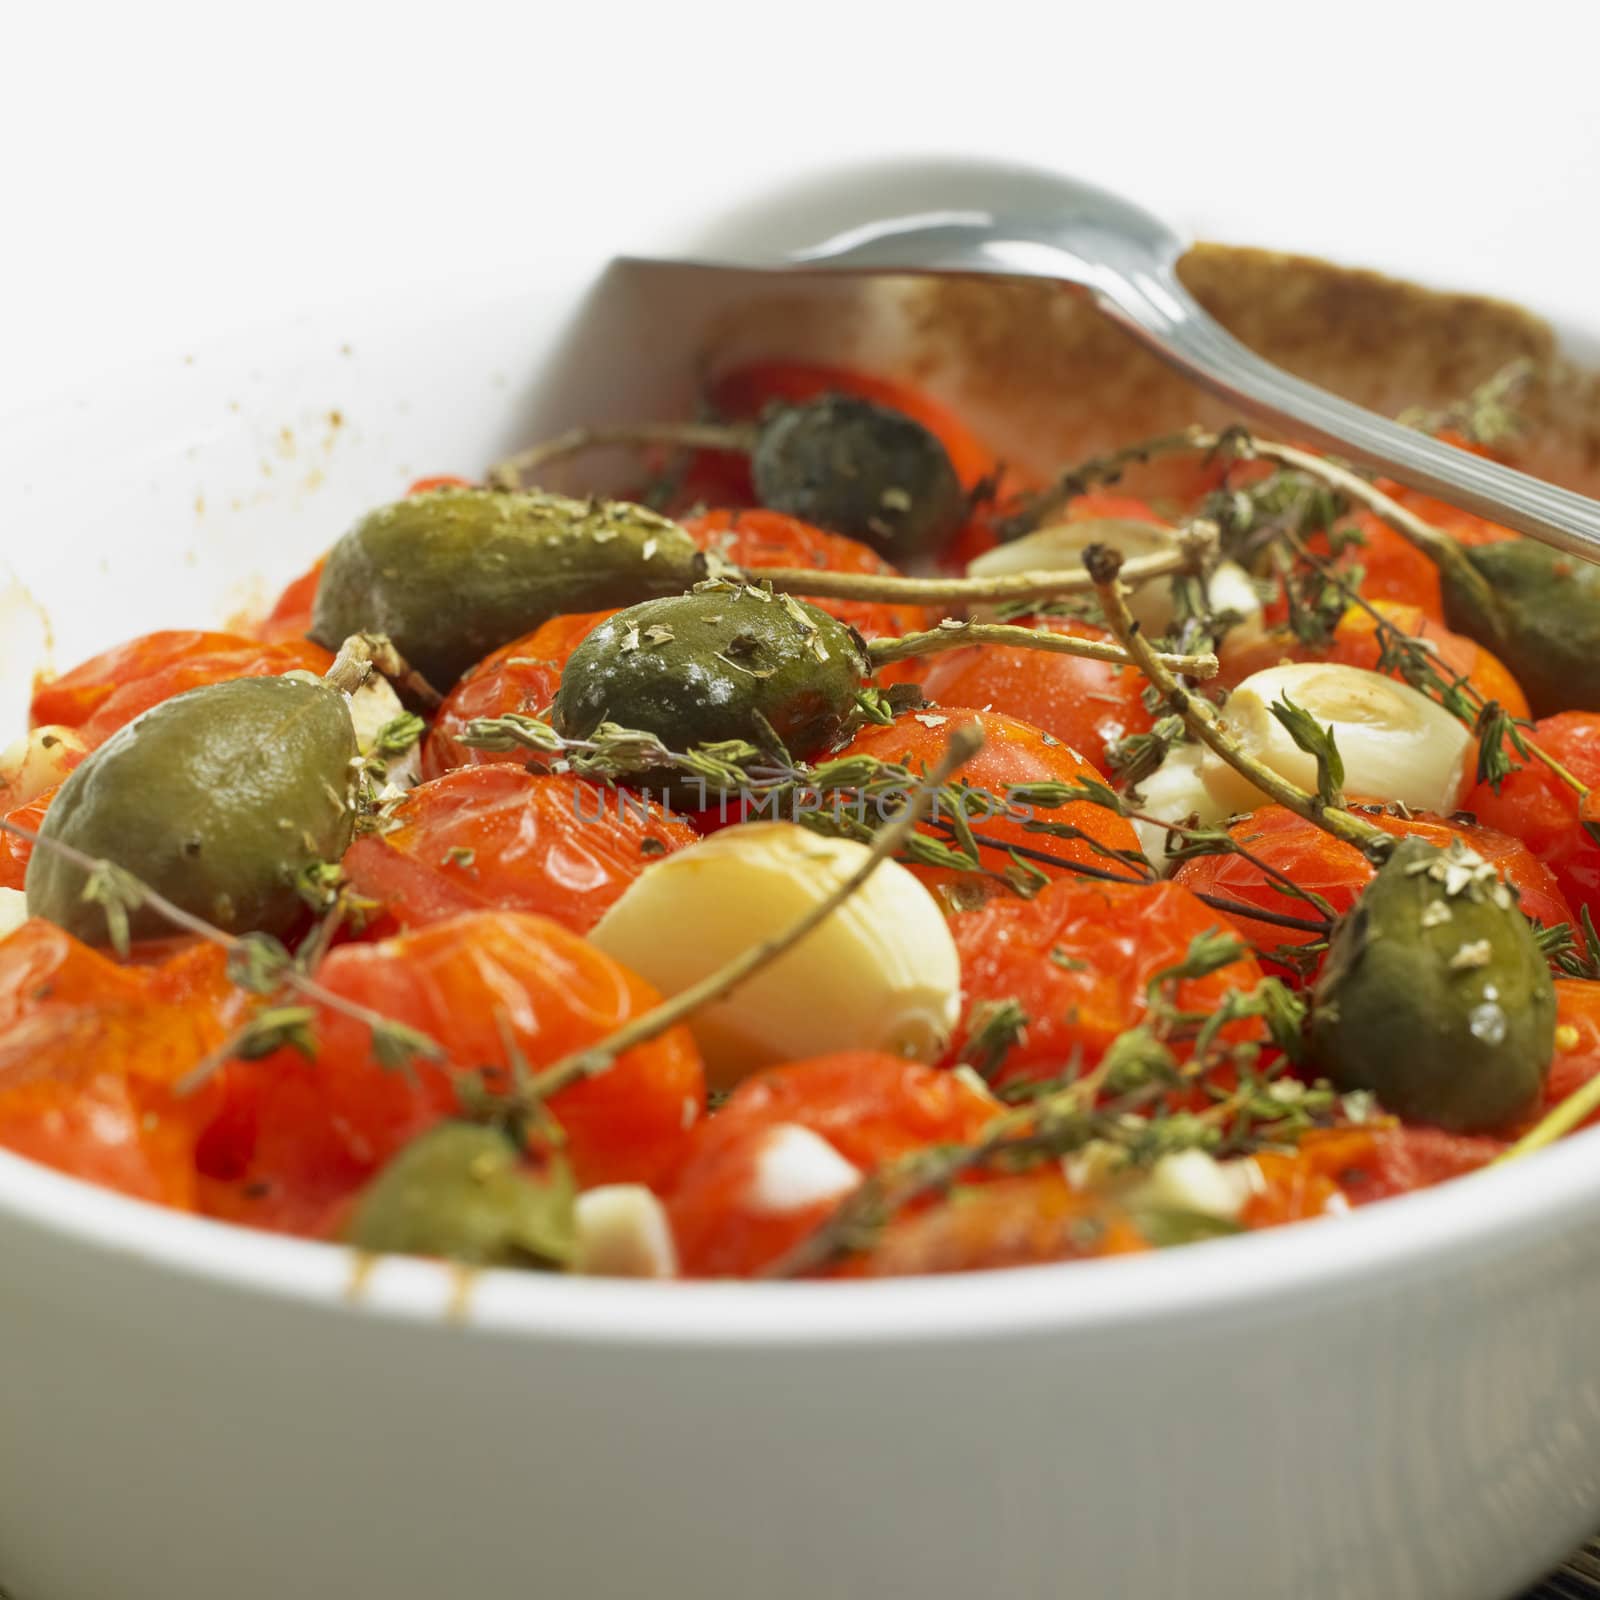 warm tomato salad with capers by phbcz